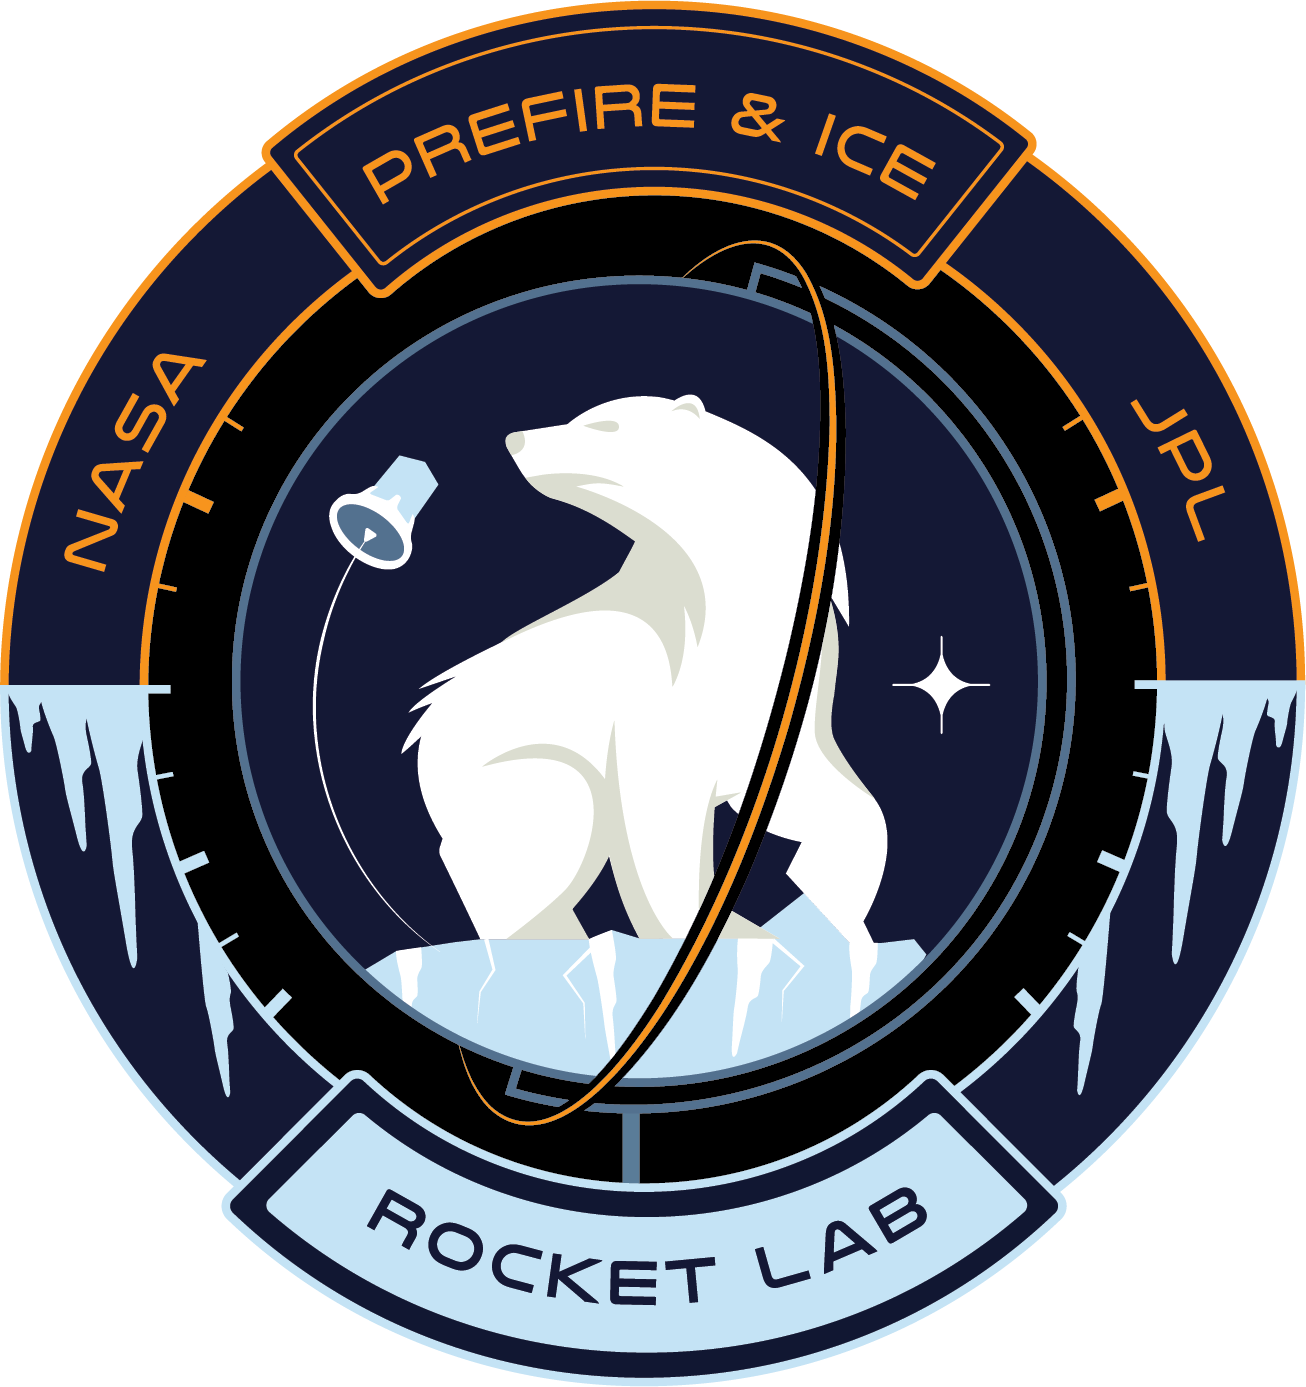 Rocket Lab PREFIRE and ICE  Mission Patch